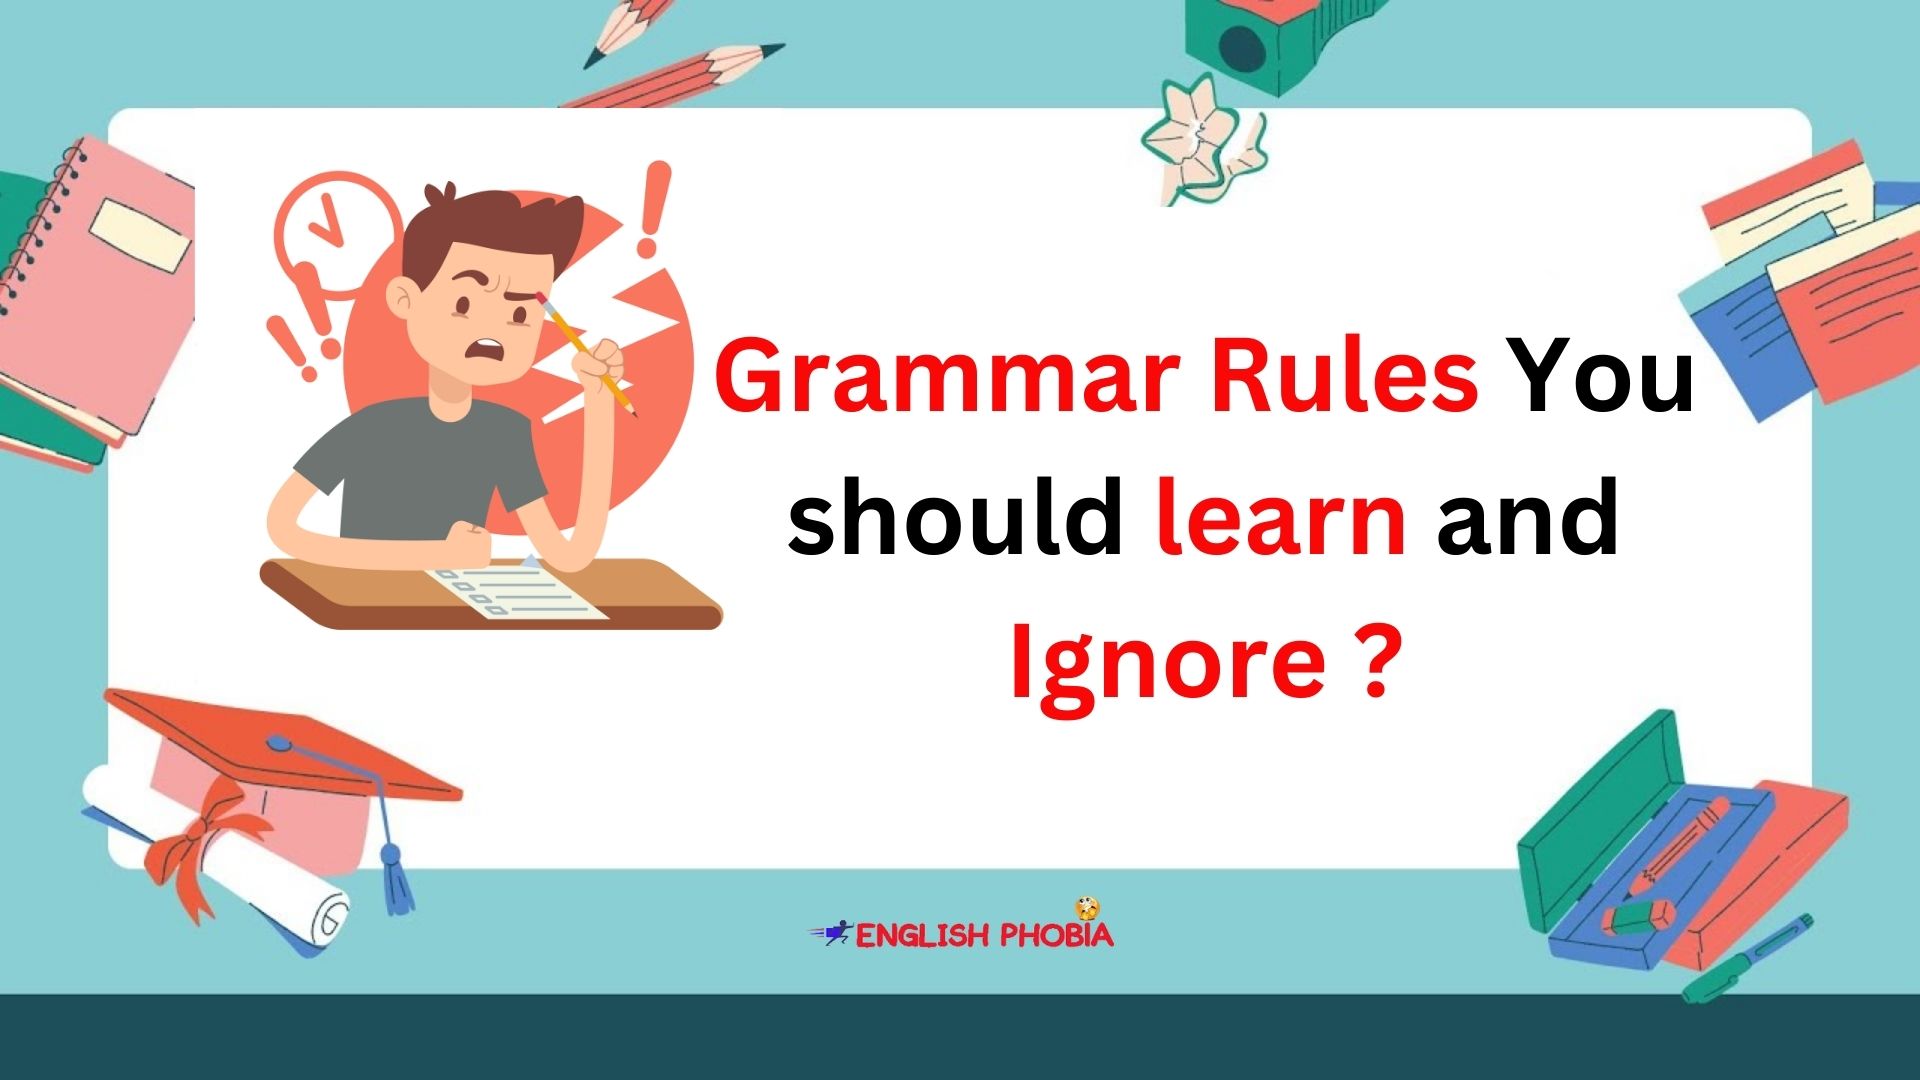 Grammar Rules You should learn and ignore